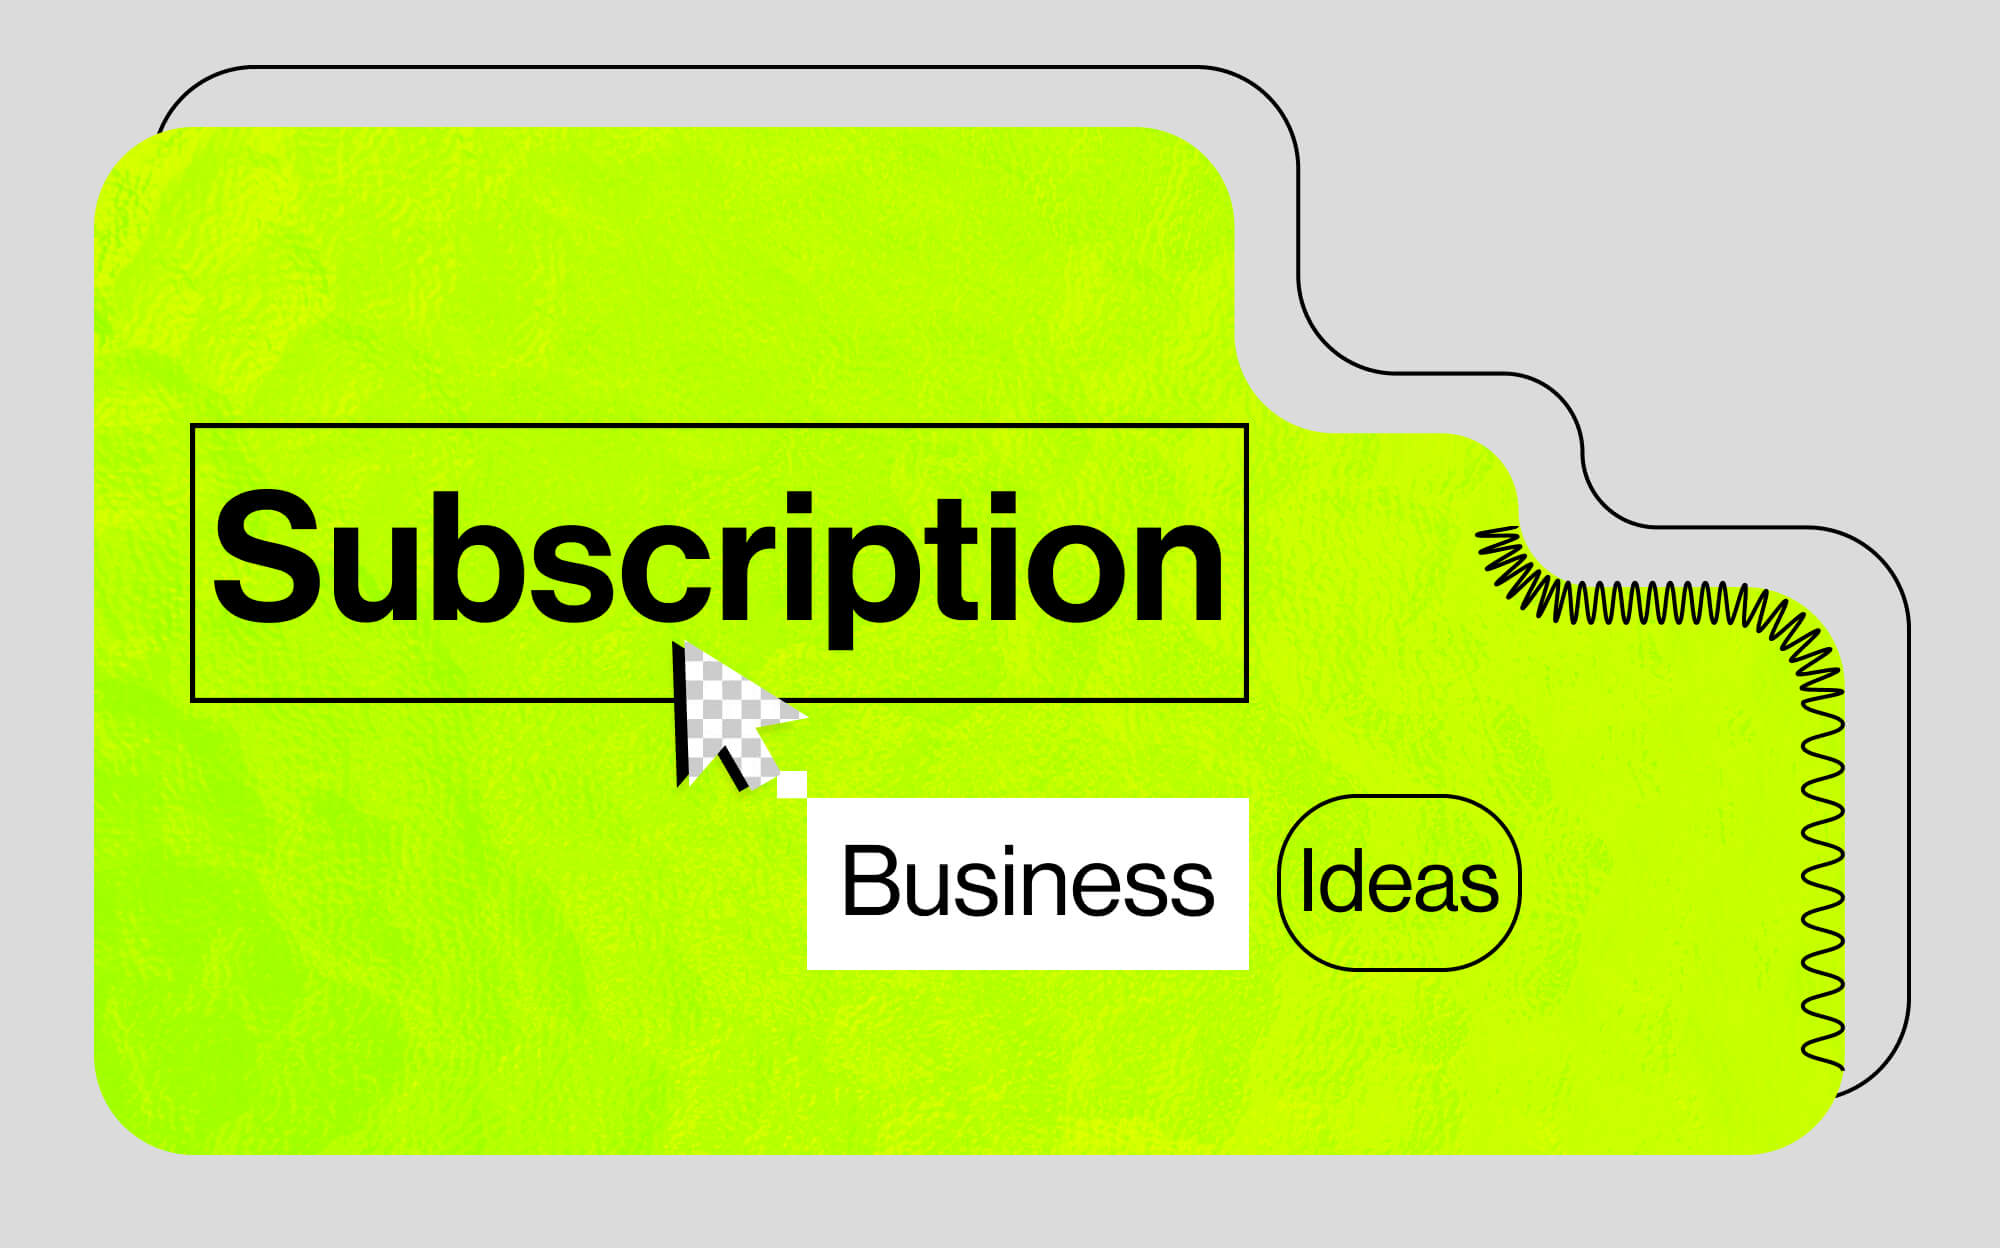 Subscription Business Ideas to Attract Customers and Make a Profit